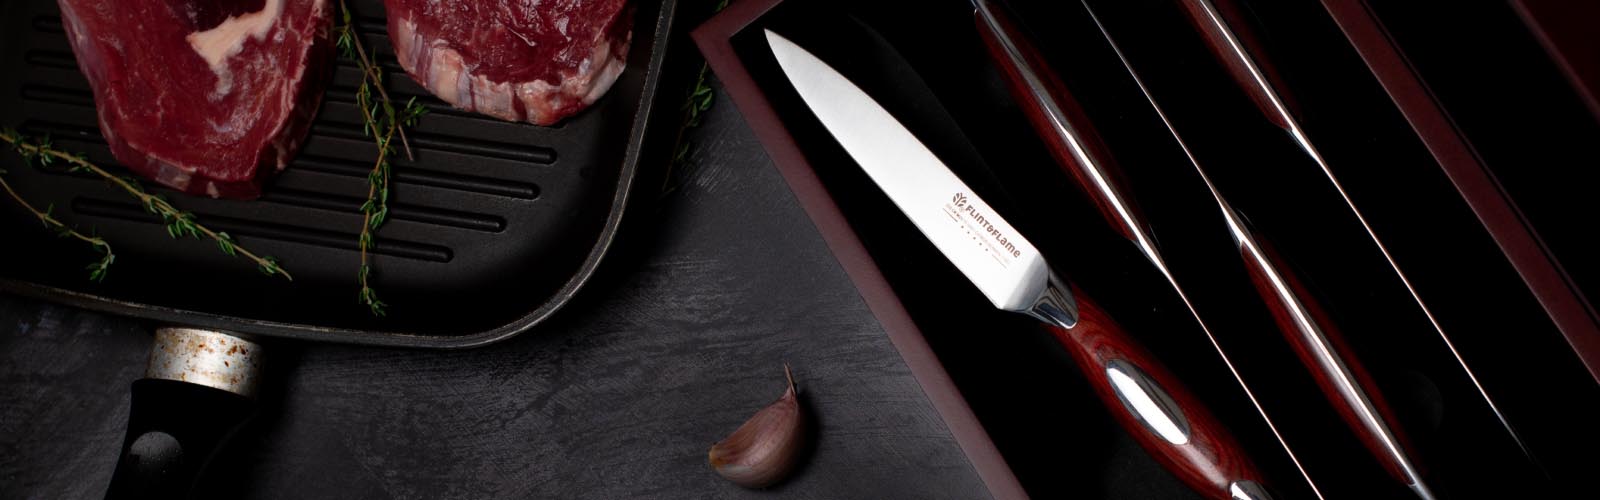 PRO SERIES 10″ CHEF KNIFE WITH BLADE COVER - Flint and FlameFlint and Flame